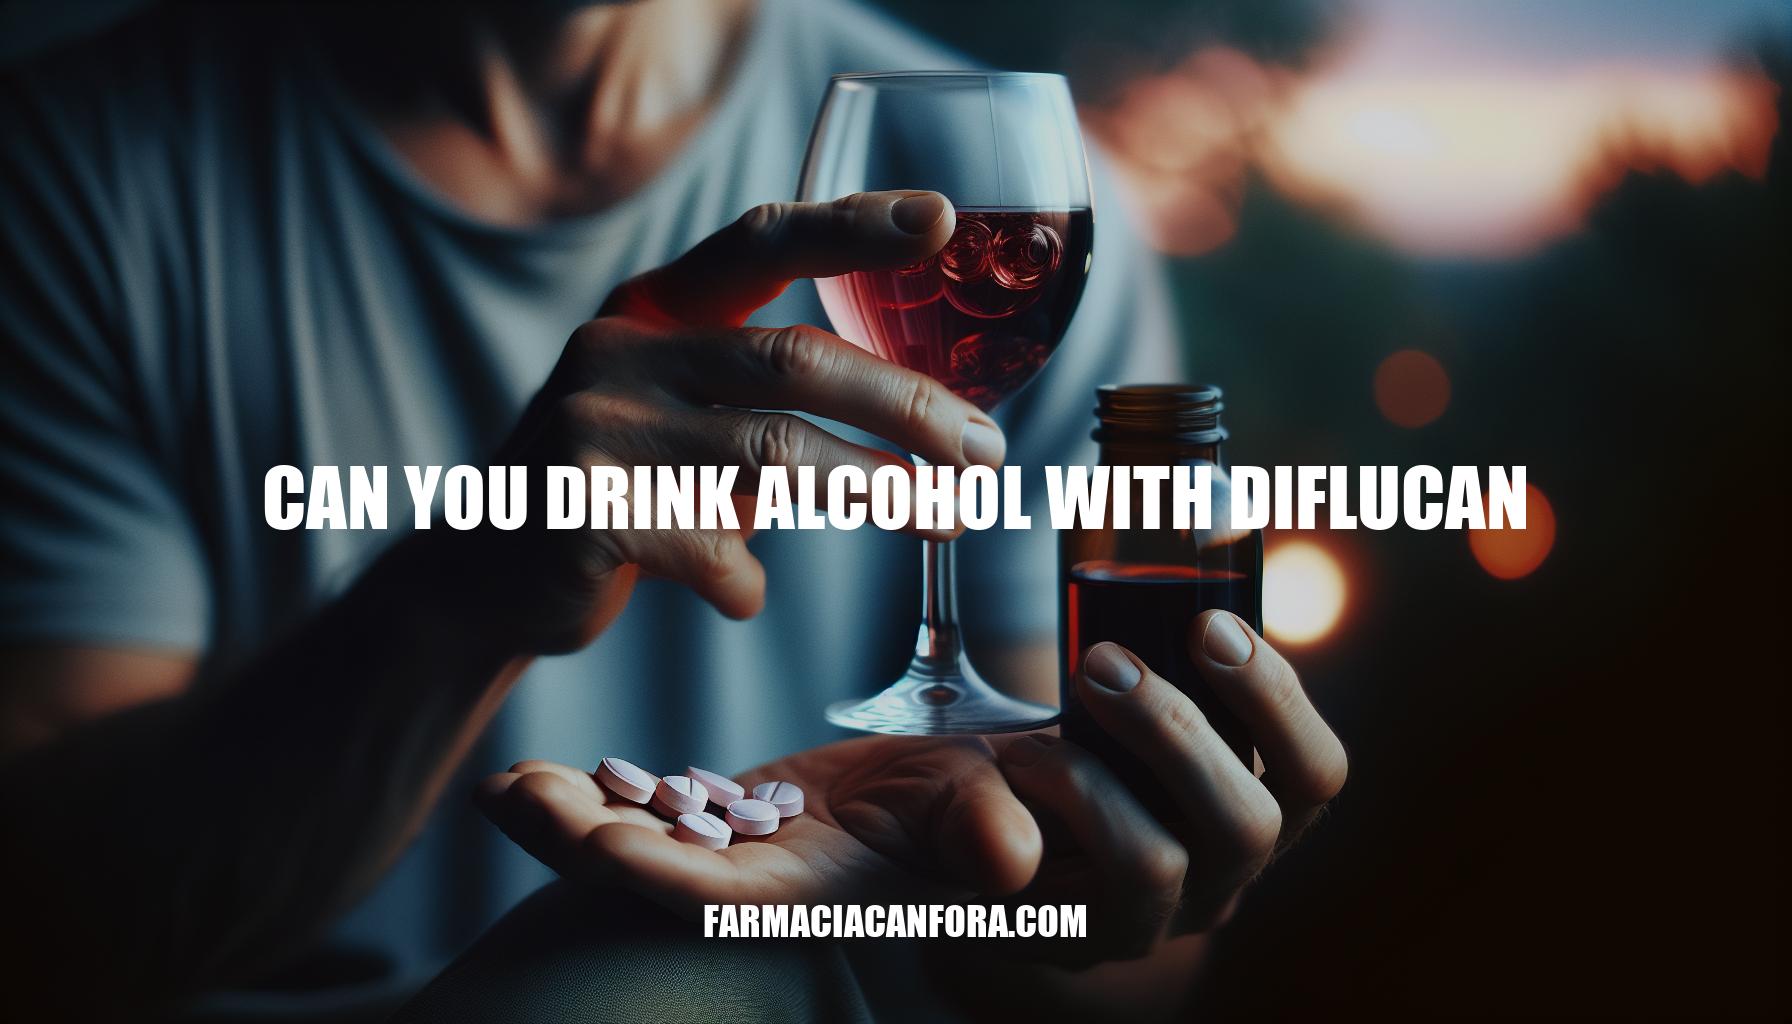 Can You Drink Alcohol with Diflucan: Risks and Guidelines